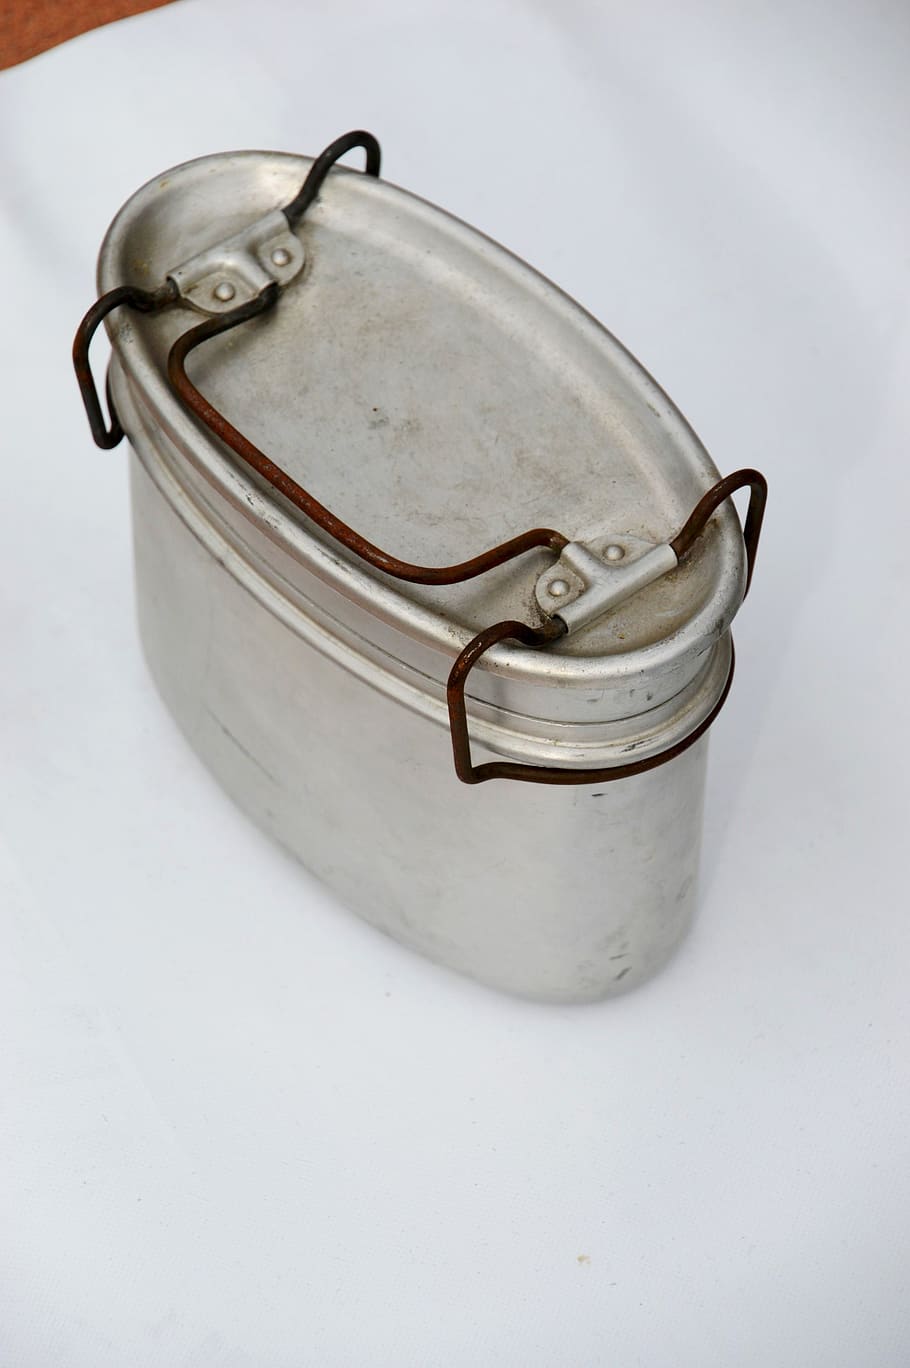 lunchbox, aluminium, container, kitchen, metal, retro, vintage, pot, old, dishes